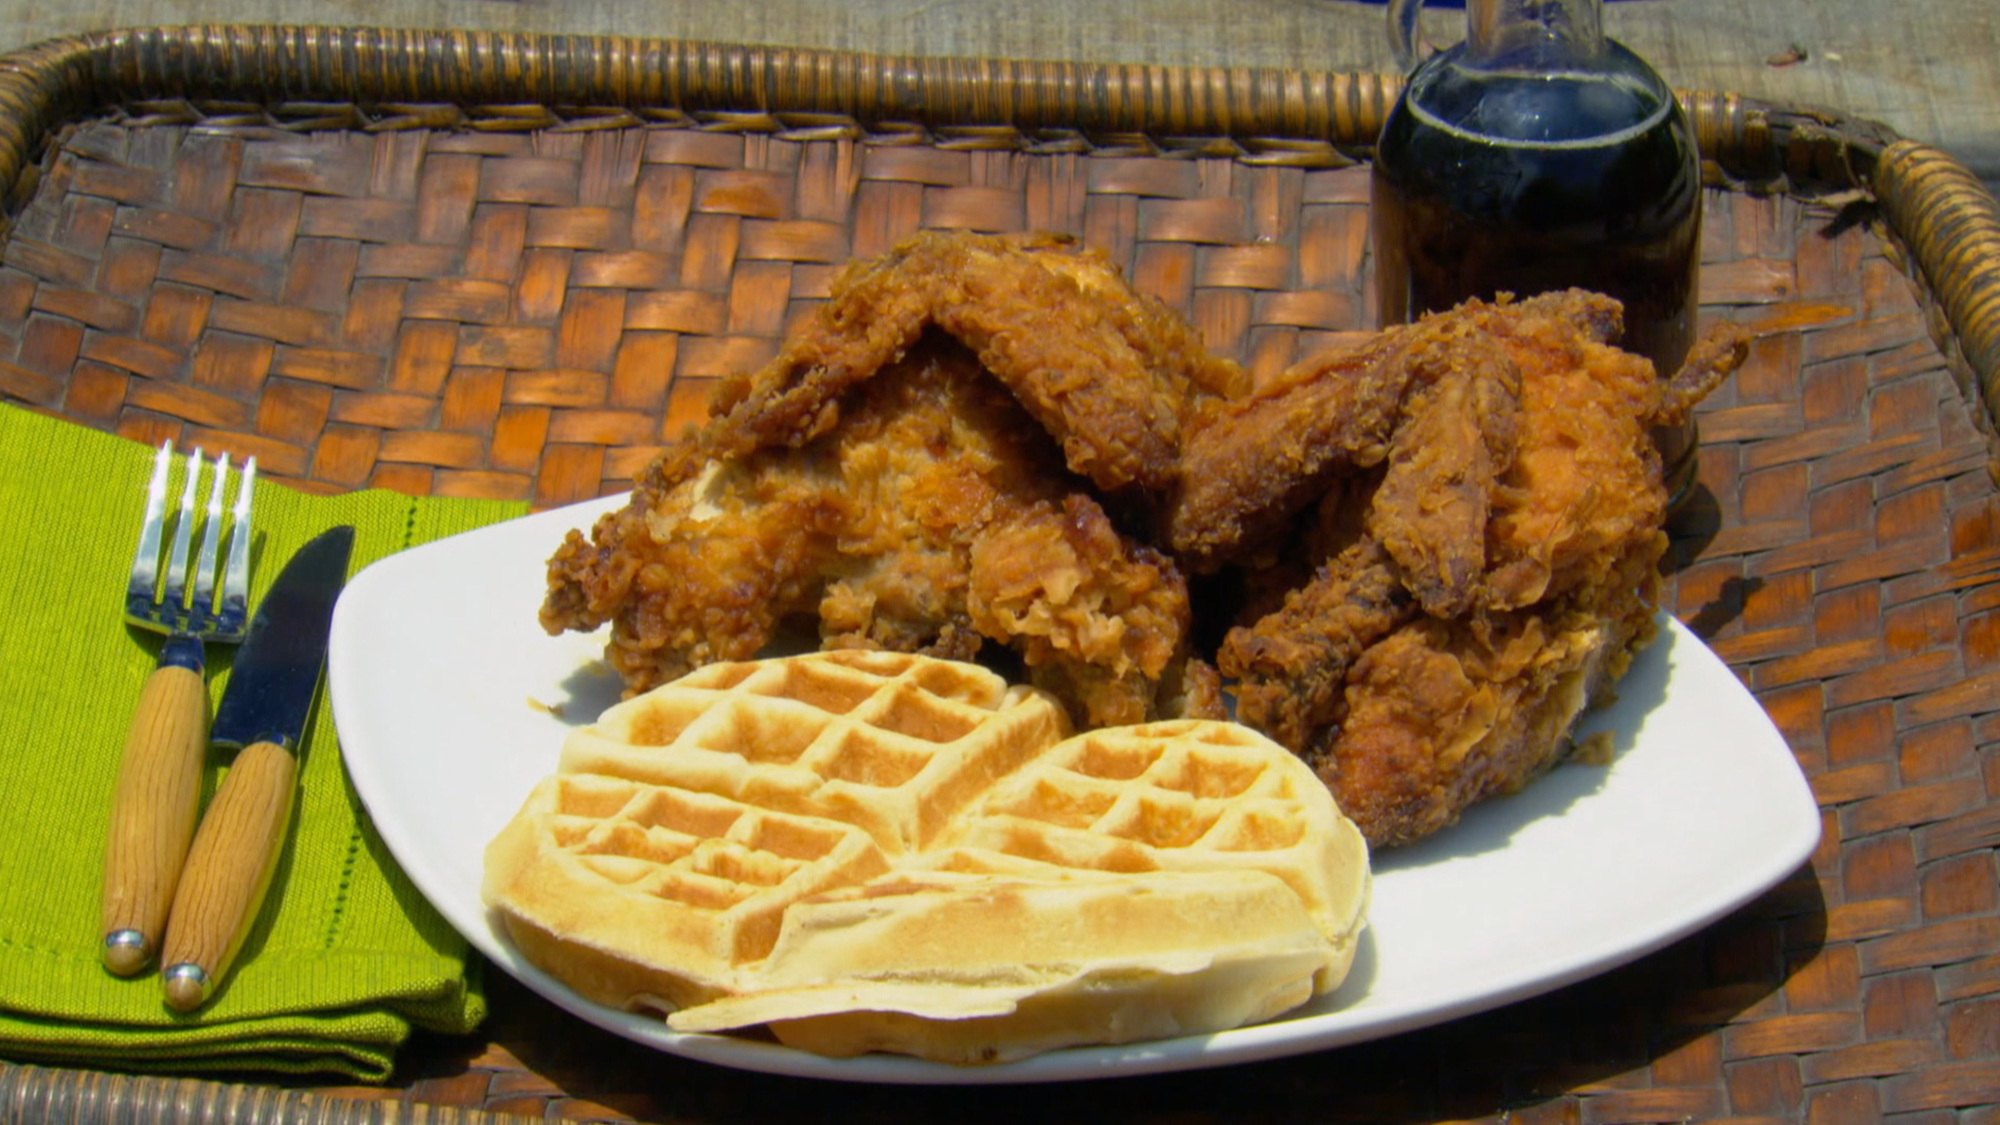 Chicken and waffles? Yes, please.